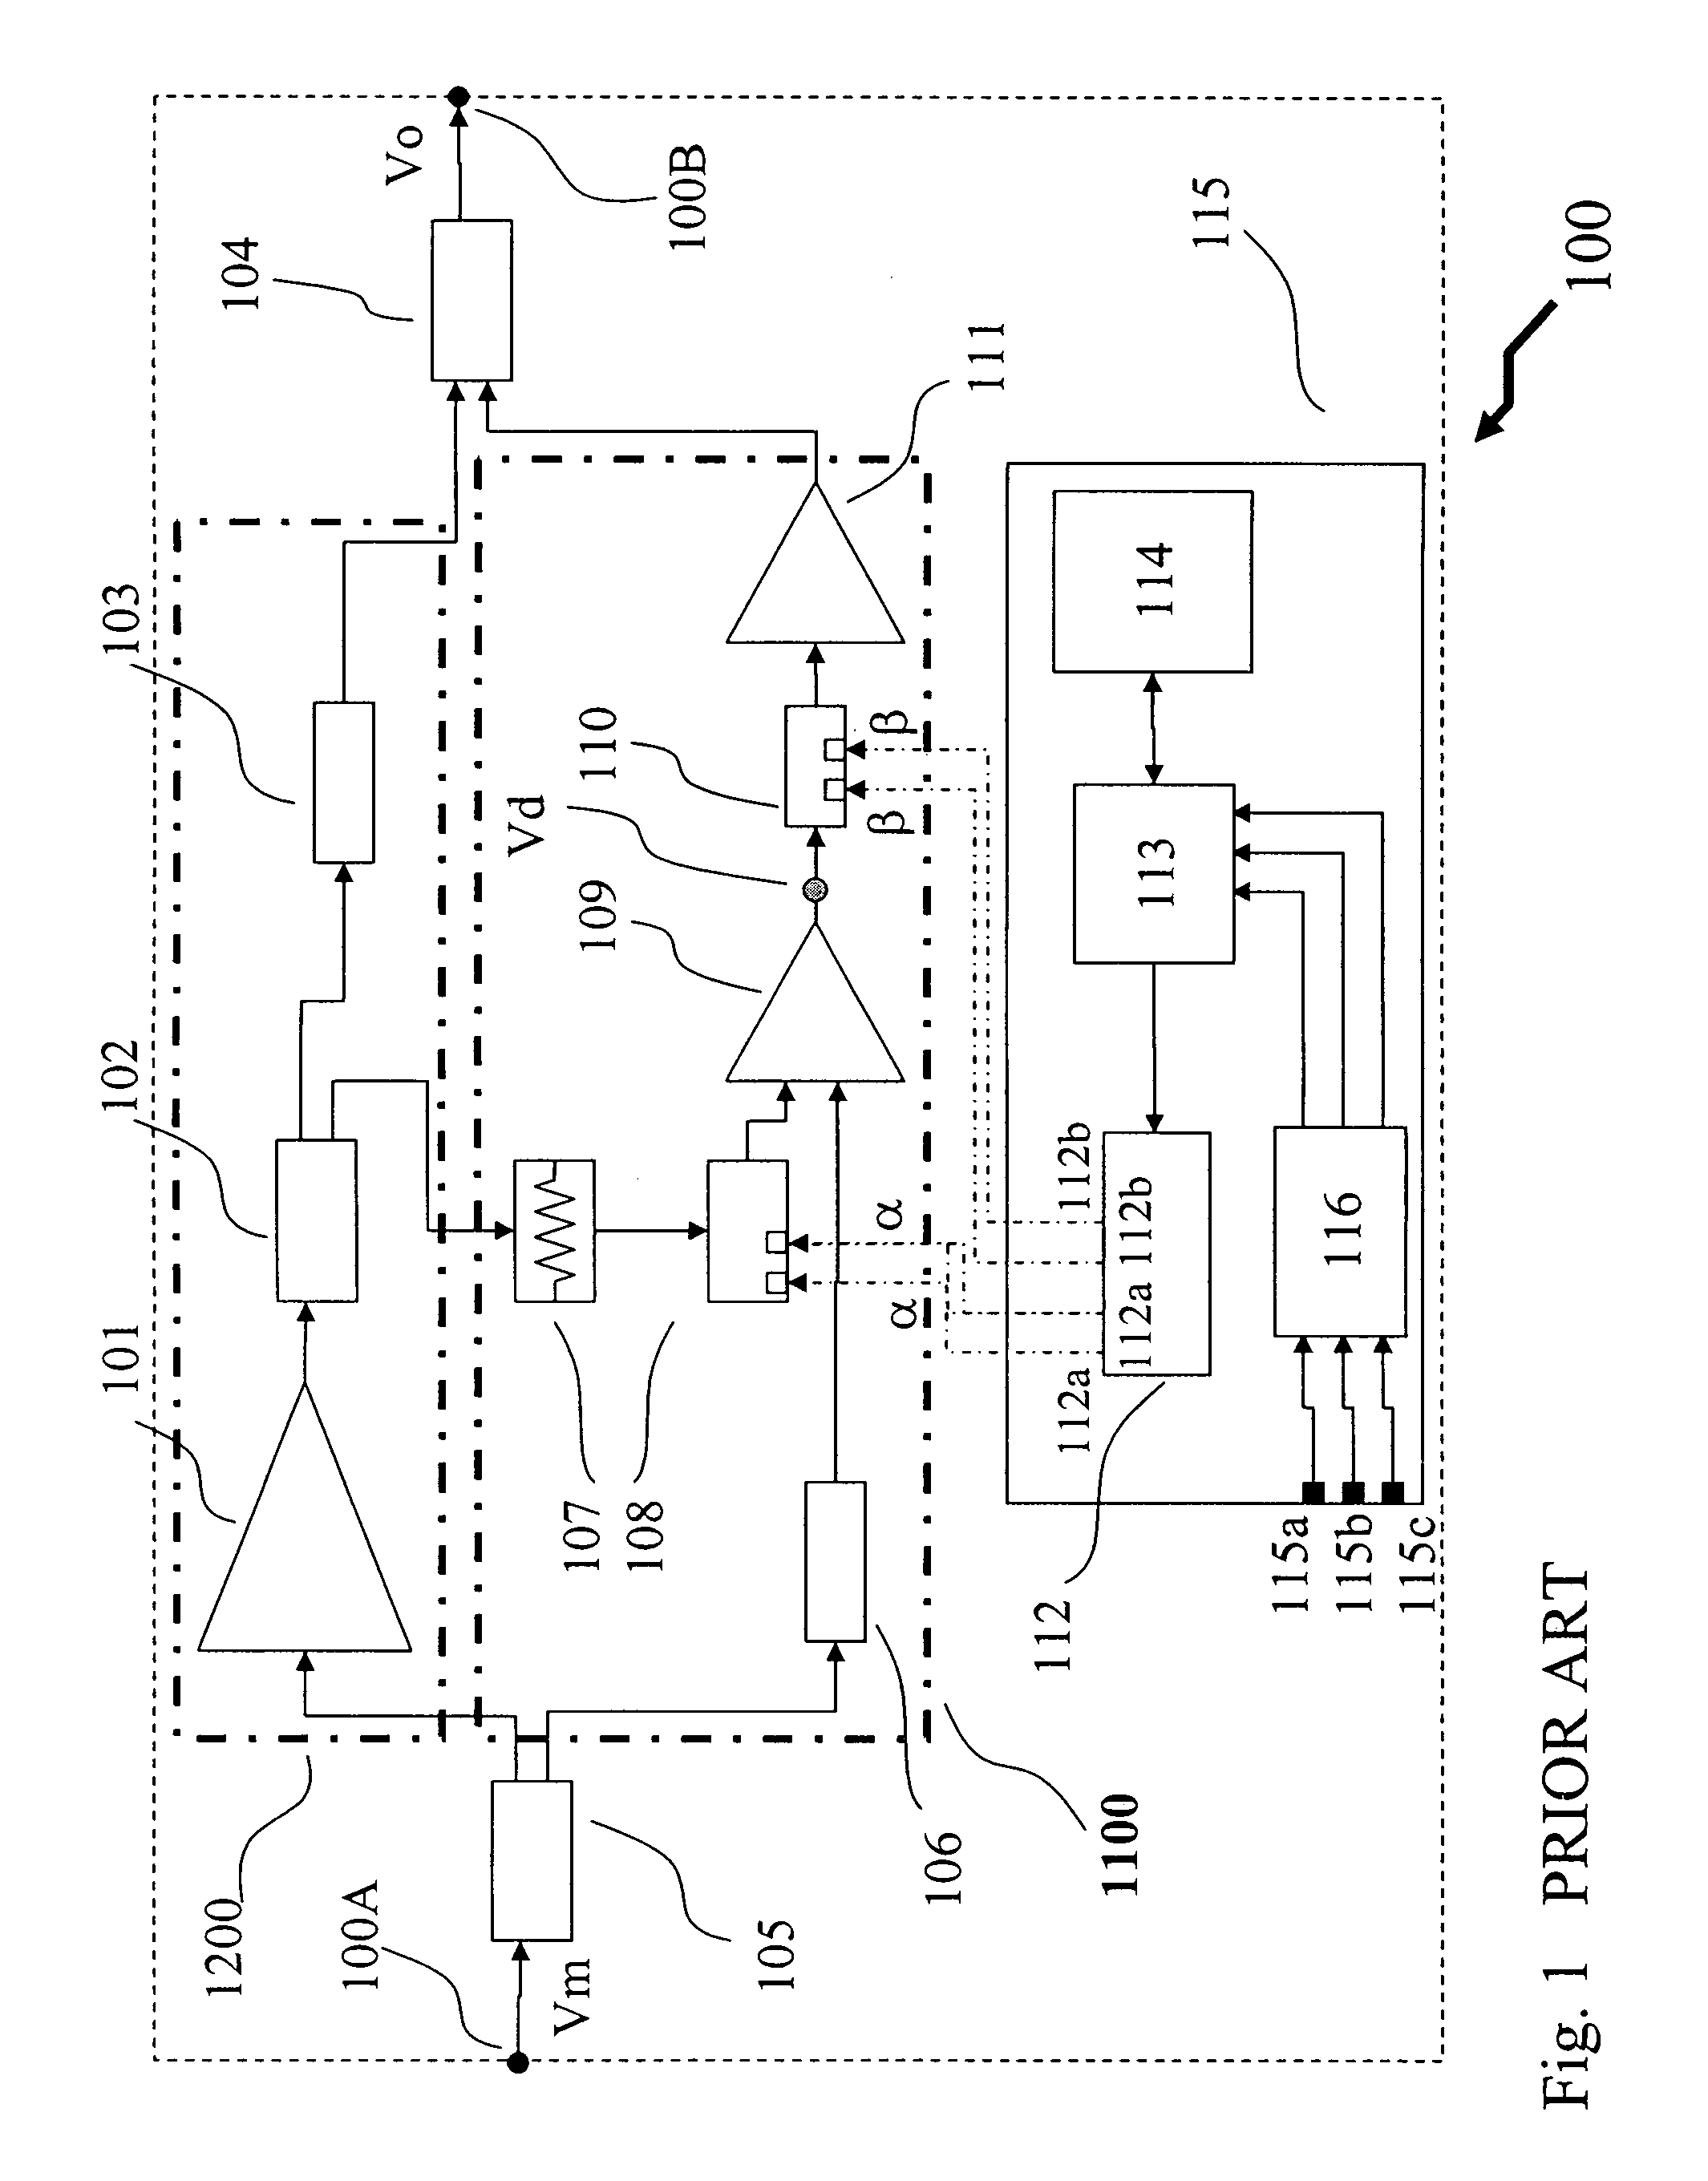 Method and apparatus for a cartesian error feedback circuit to correct distortion within a power amplifier